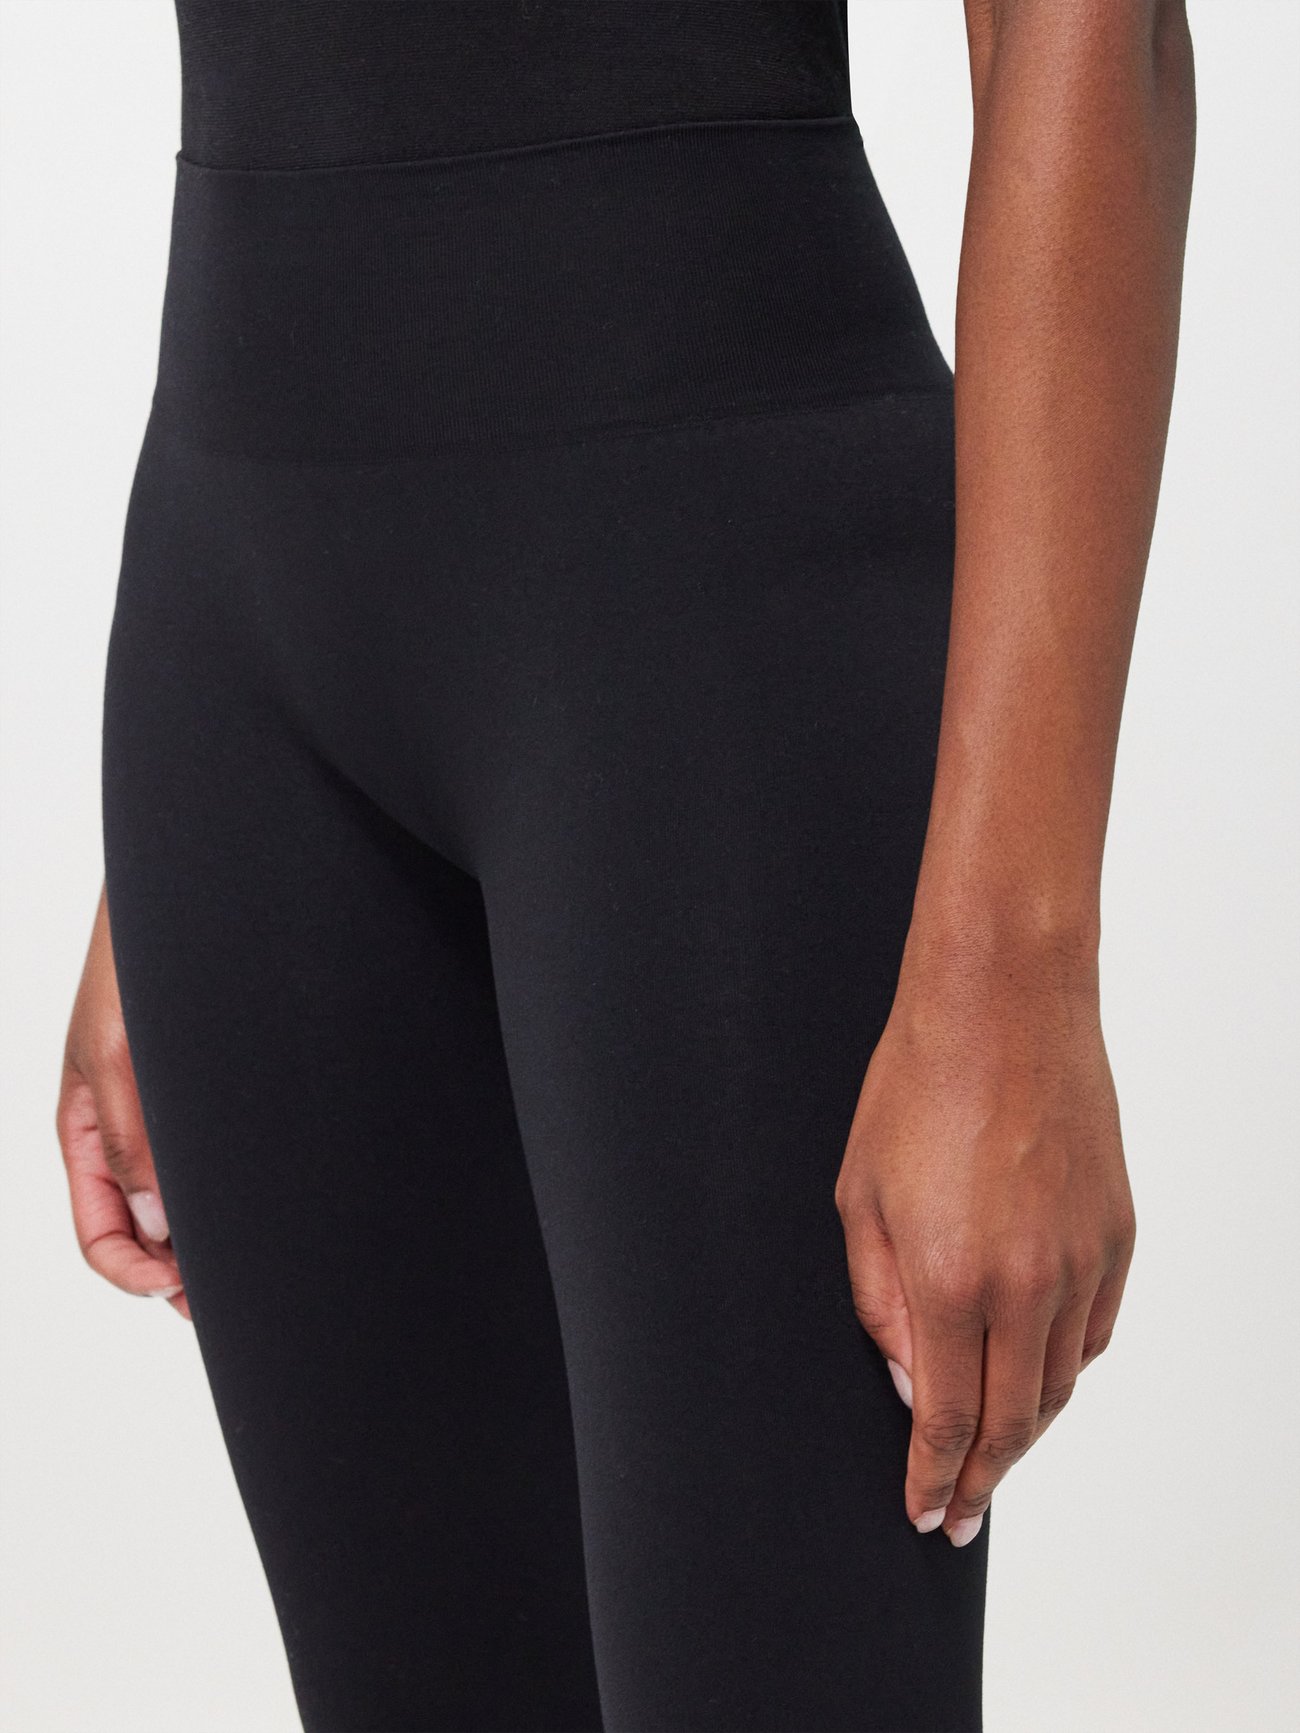 Wolford Perfect Fit legging - Bots Boutique